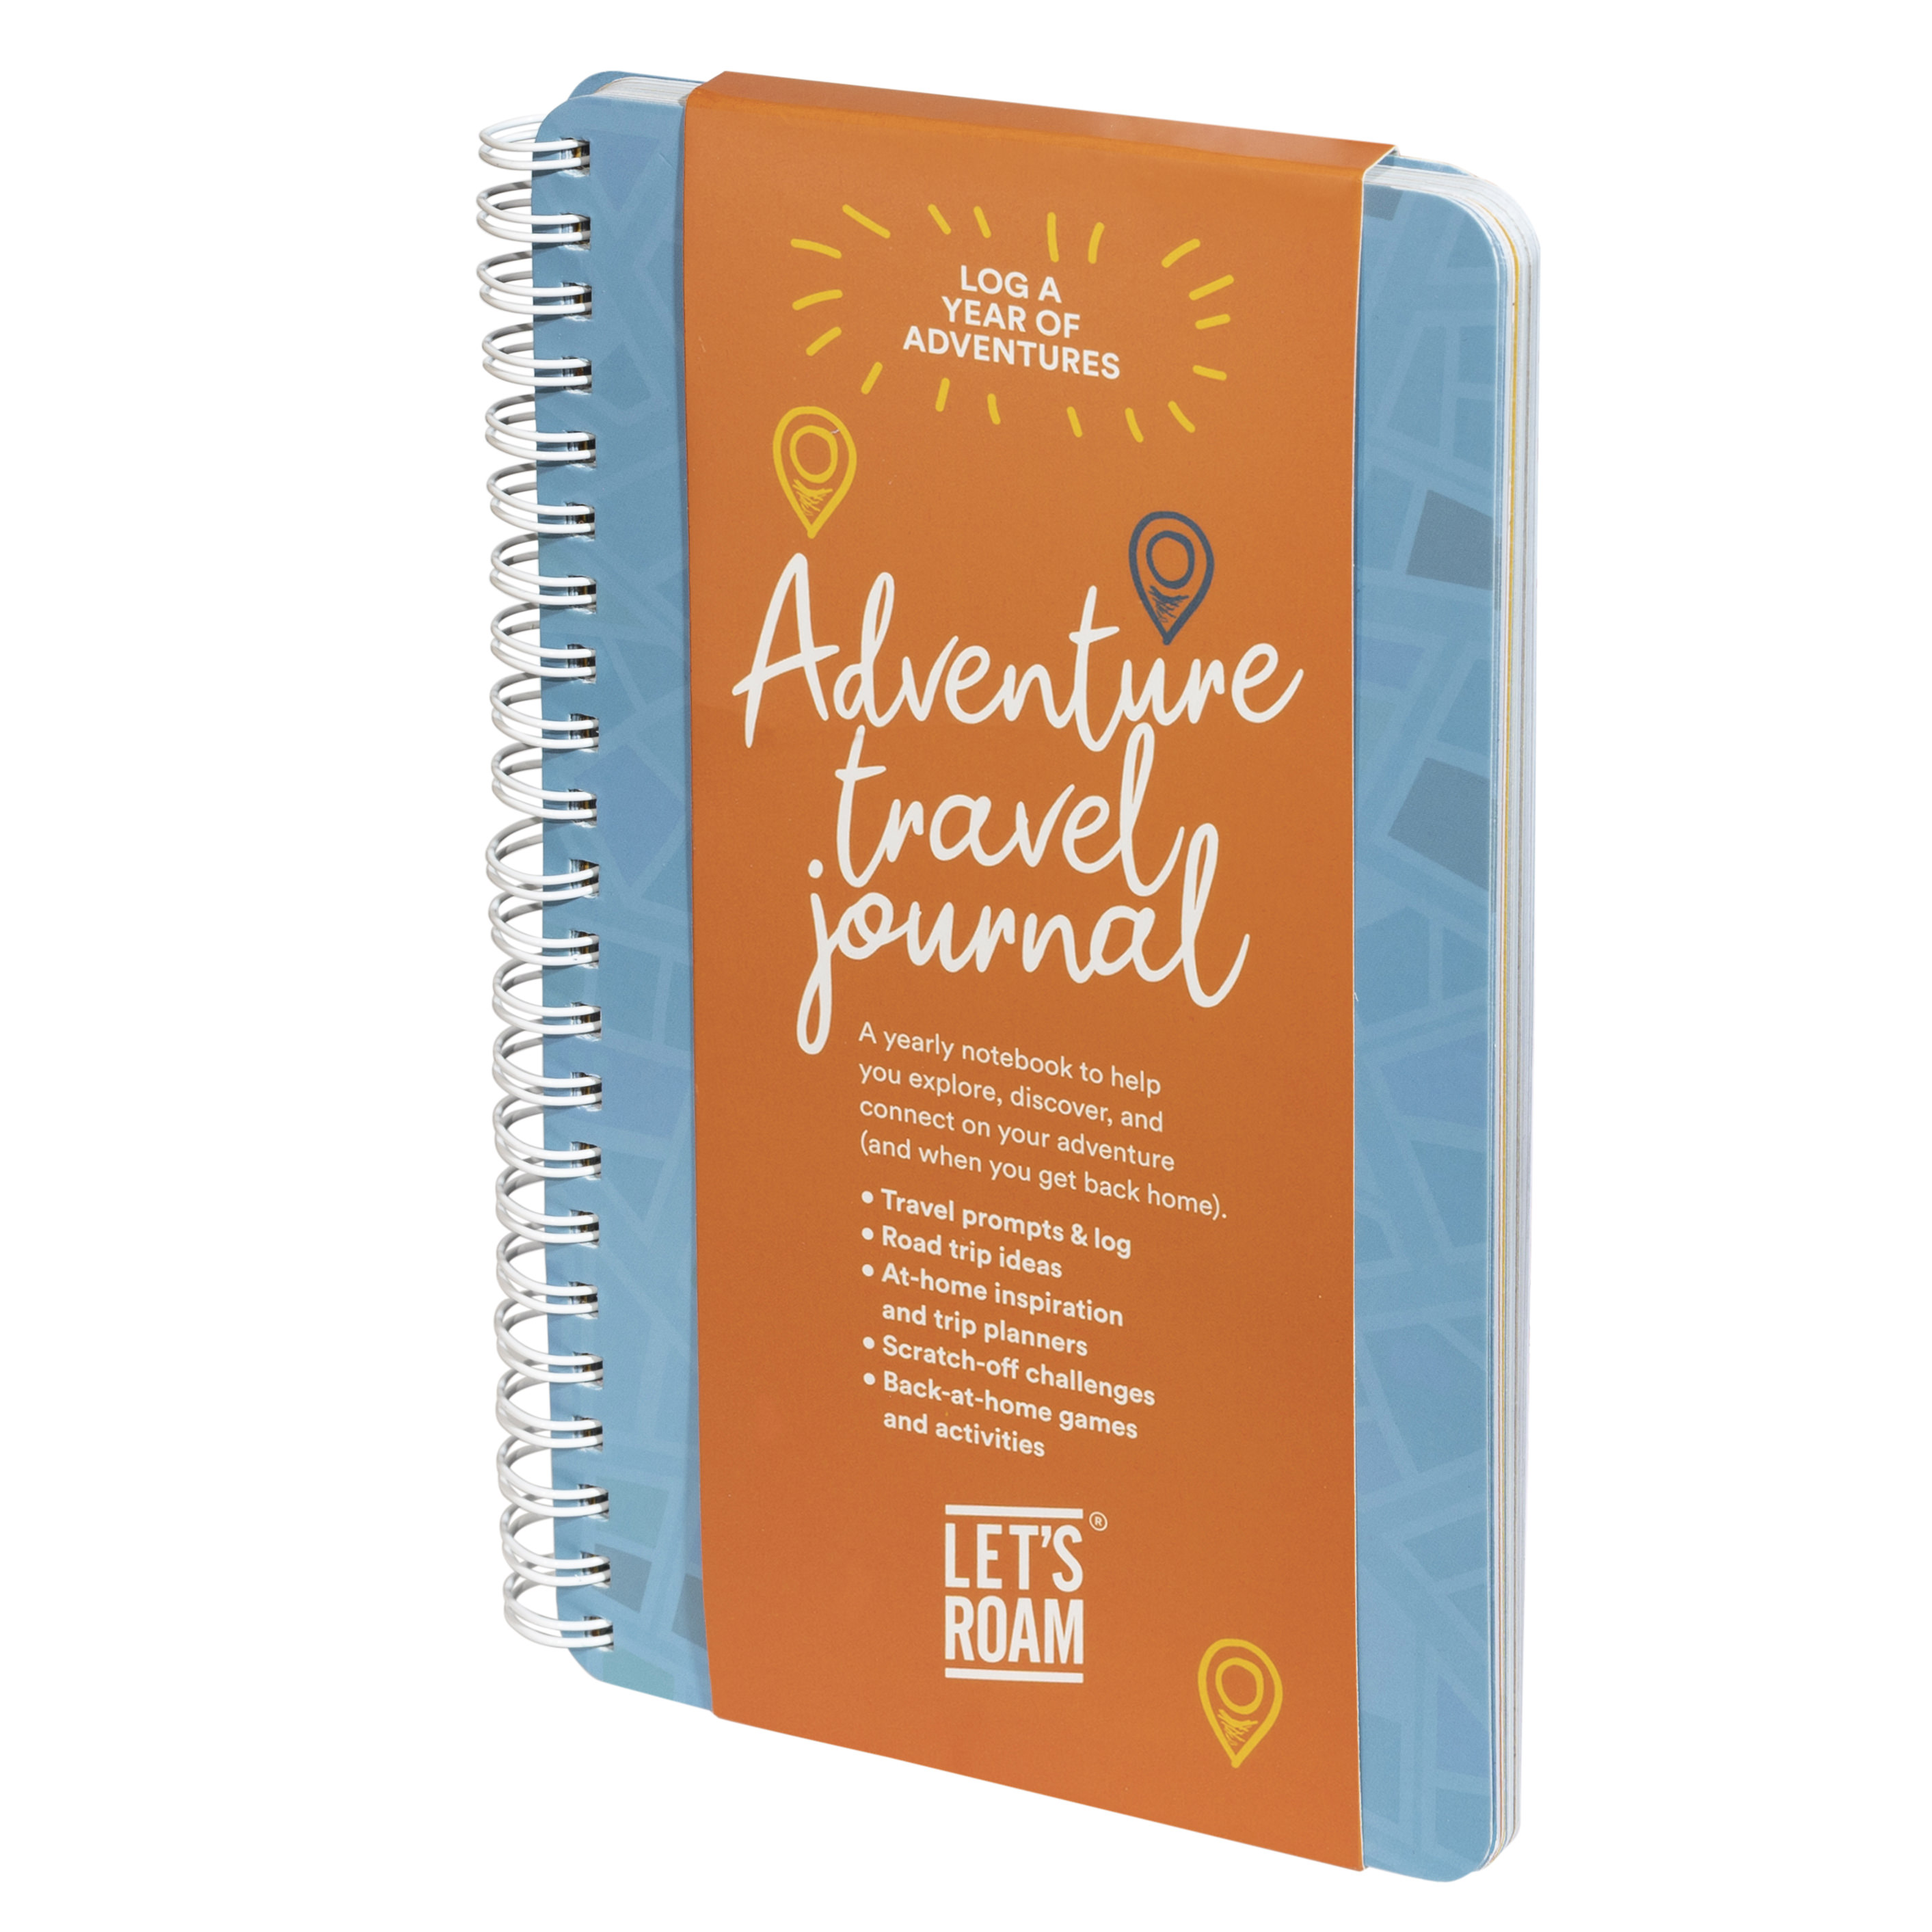 The Adventure Book - Your Journal Around The World